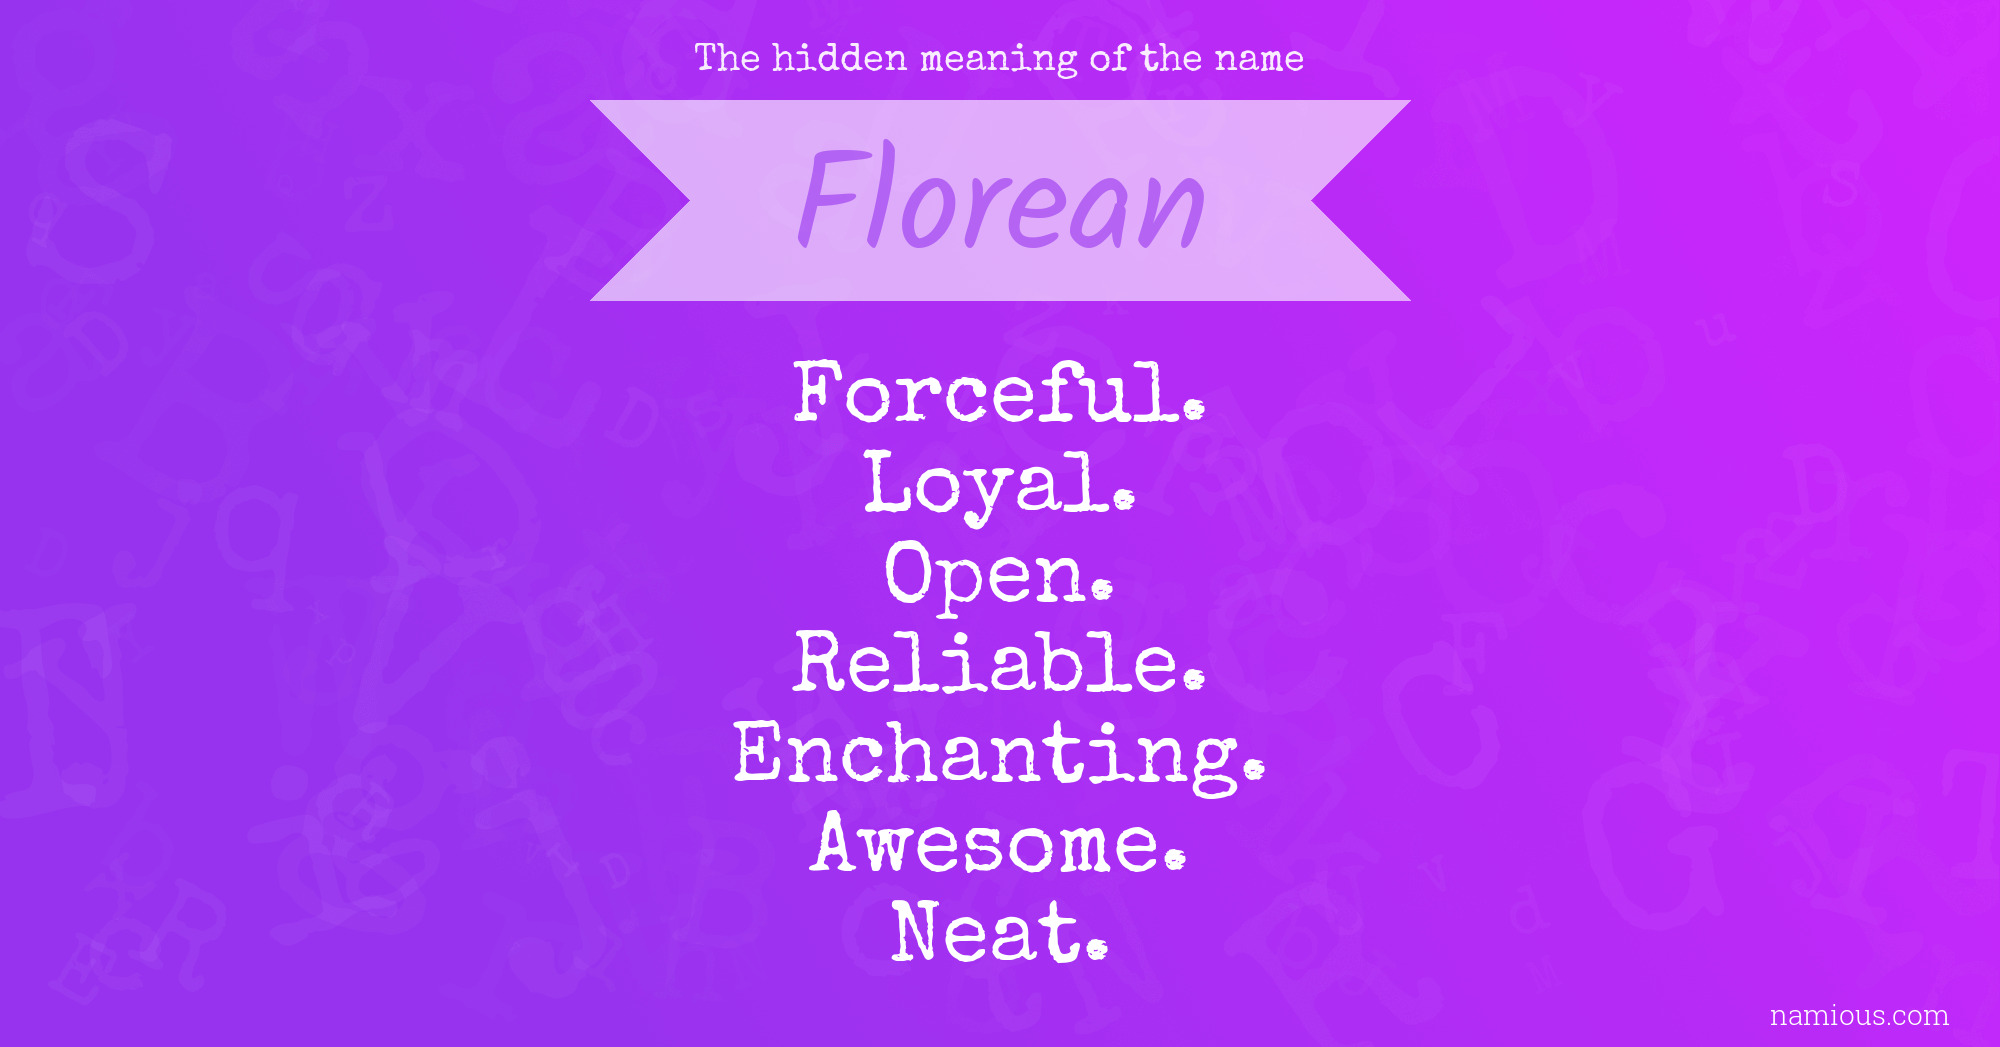 The hidden meaning of the name Florean